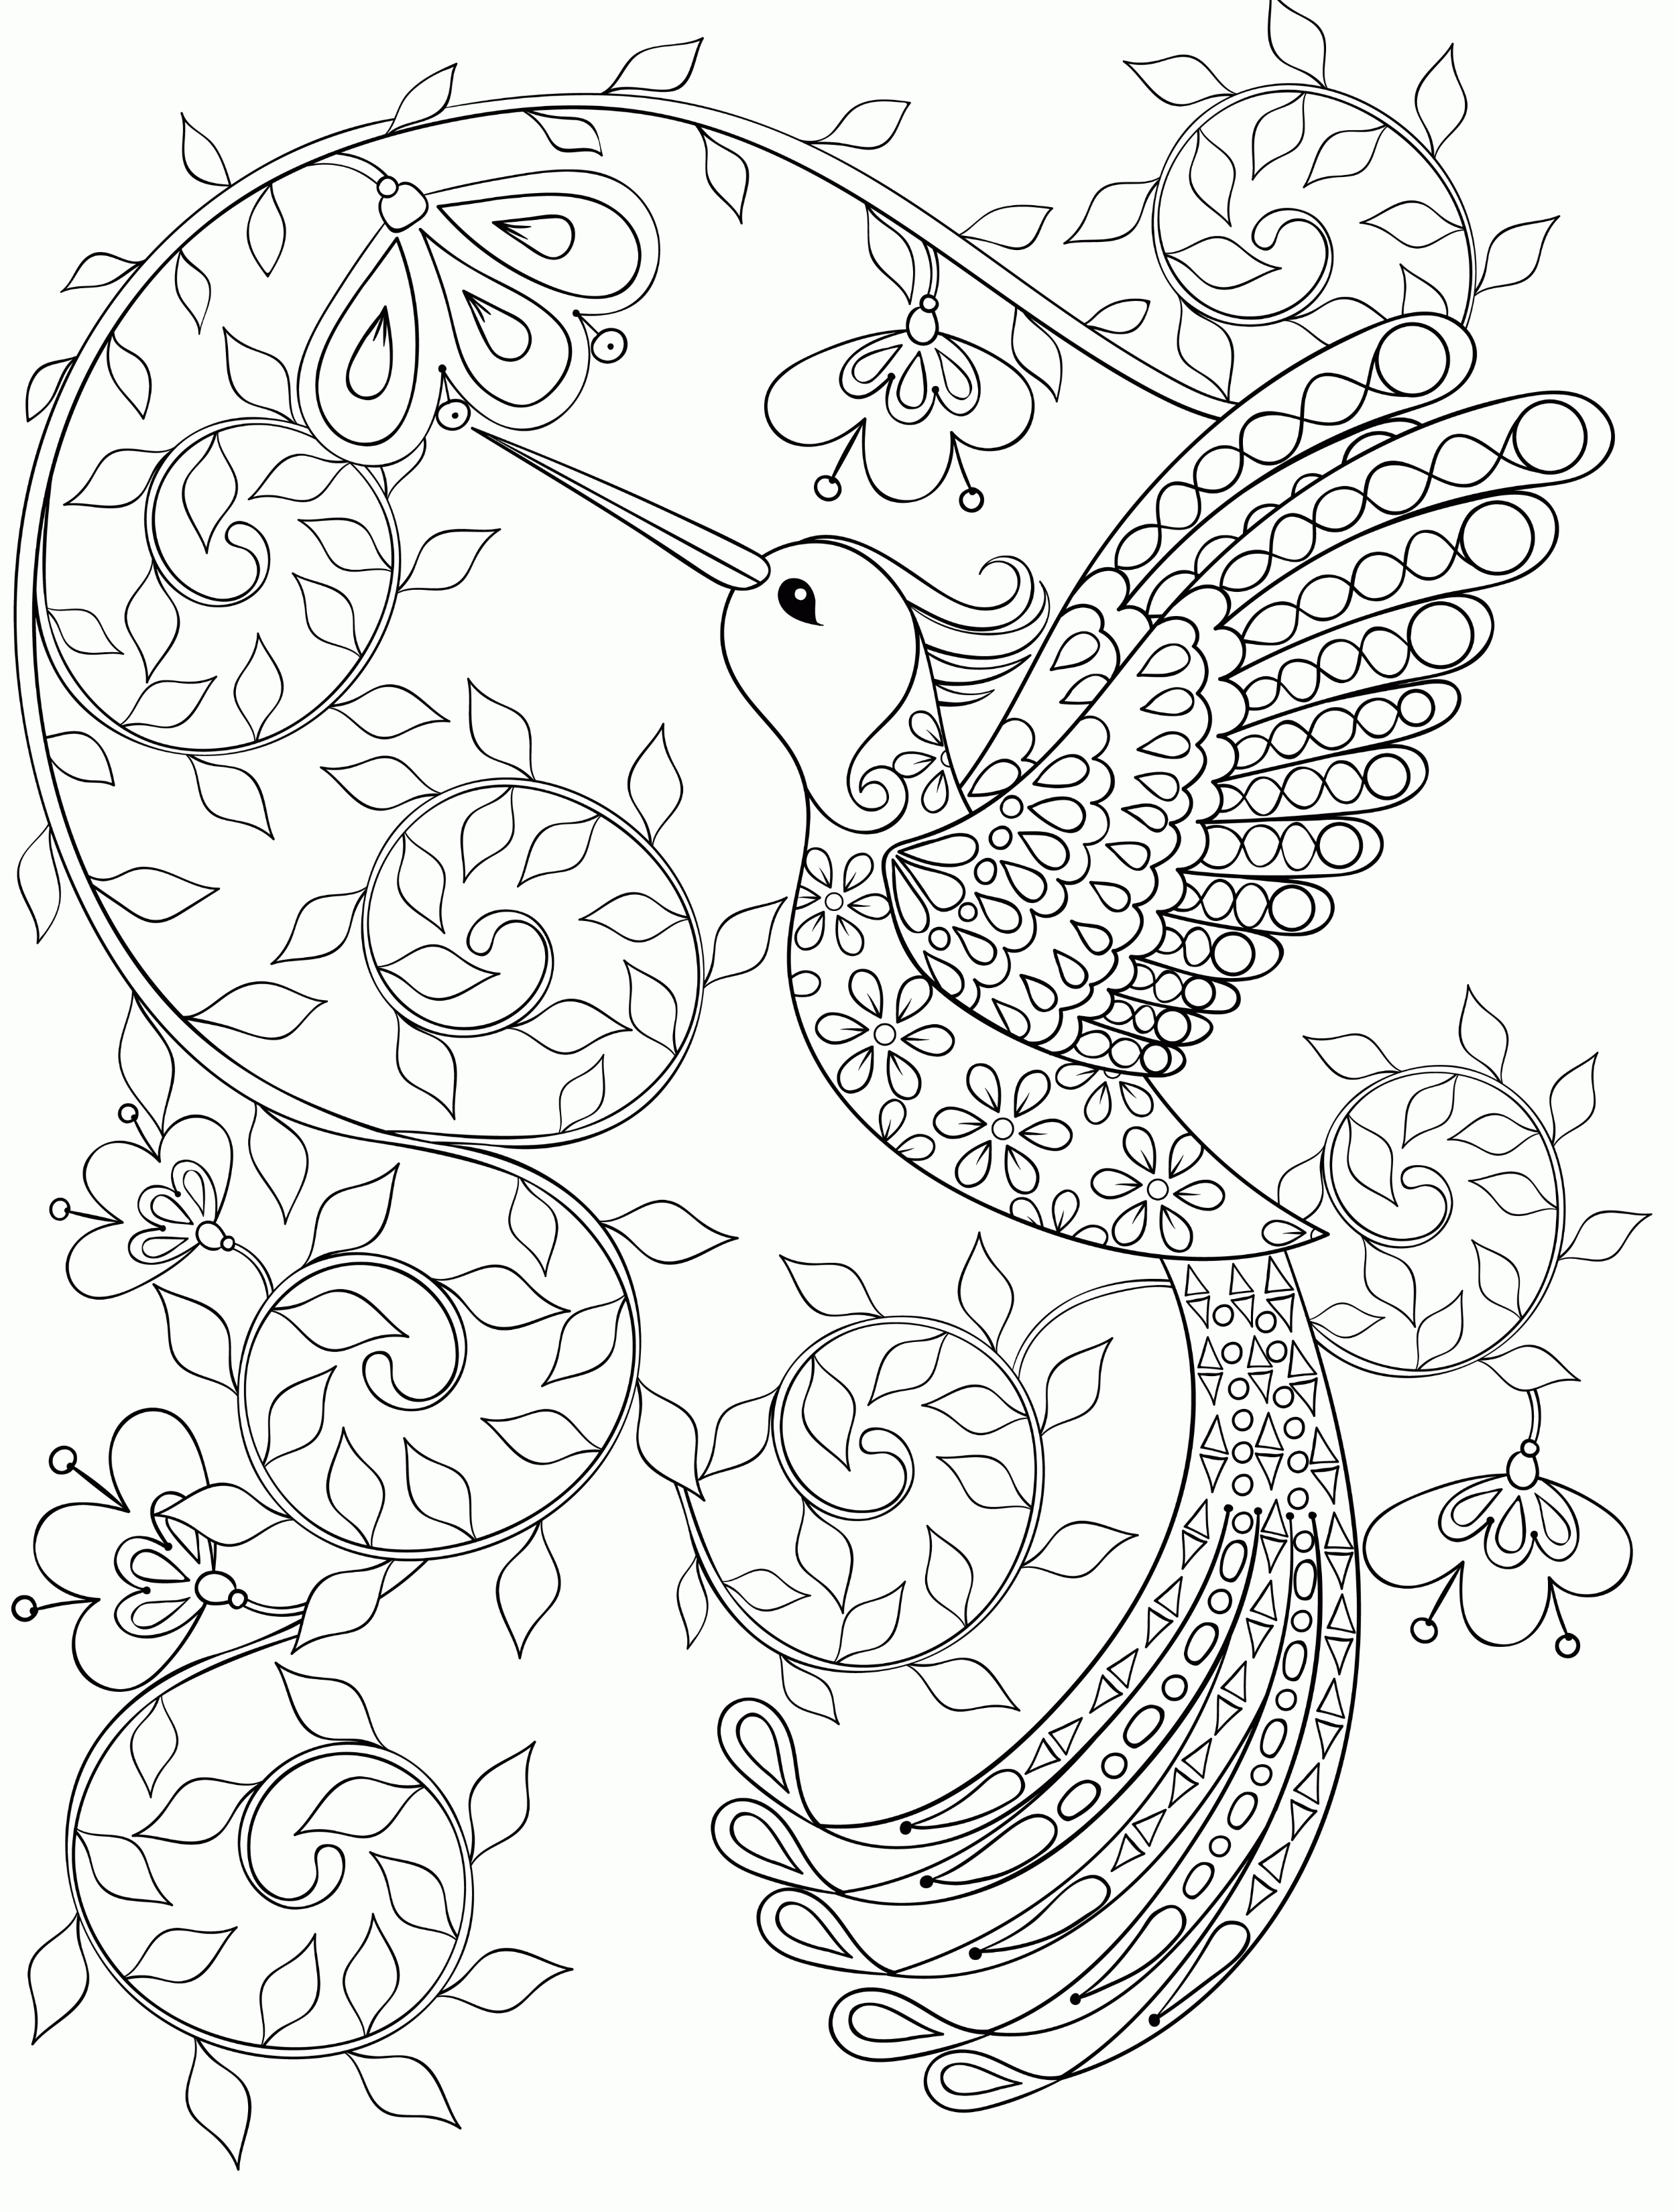 All In The World - Coloring Pages for Kids and for Adults